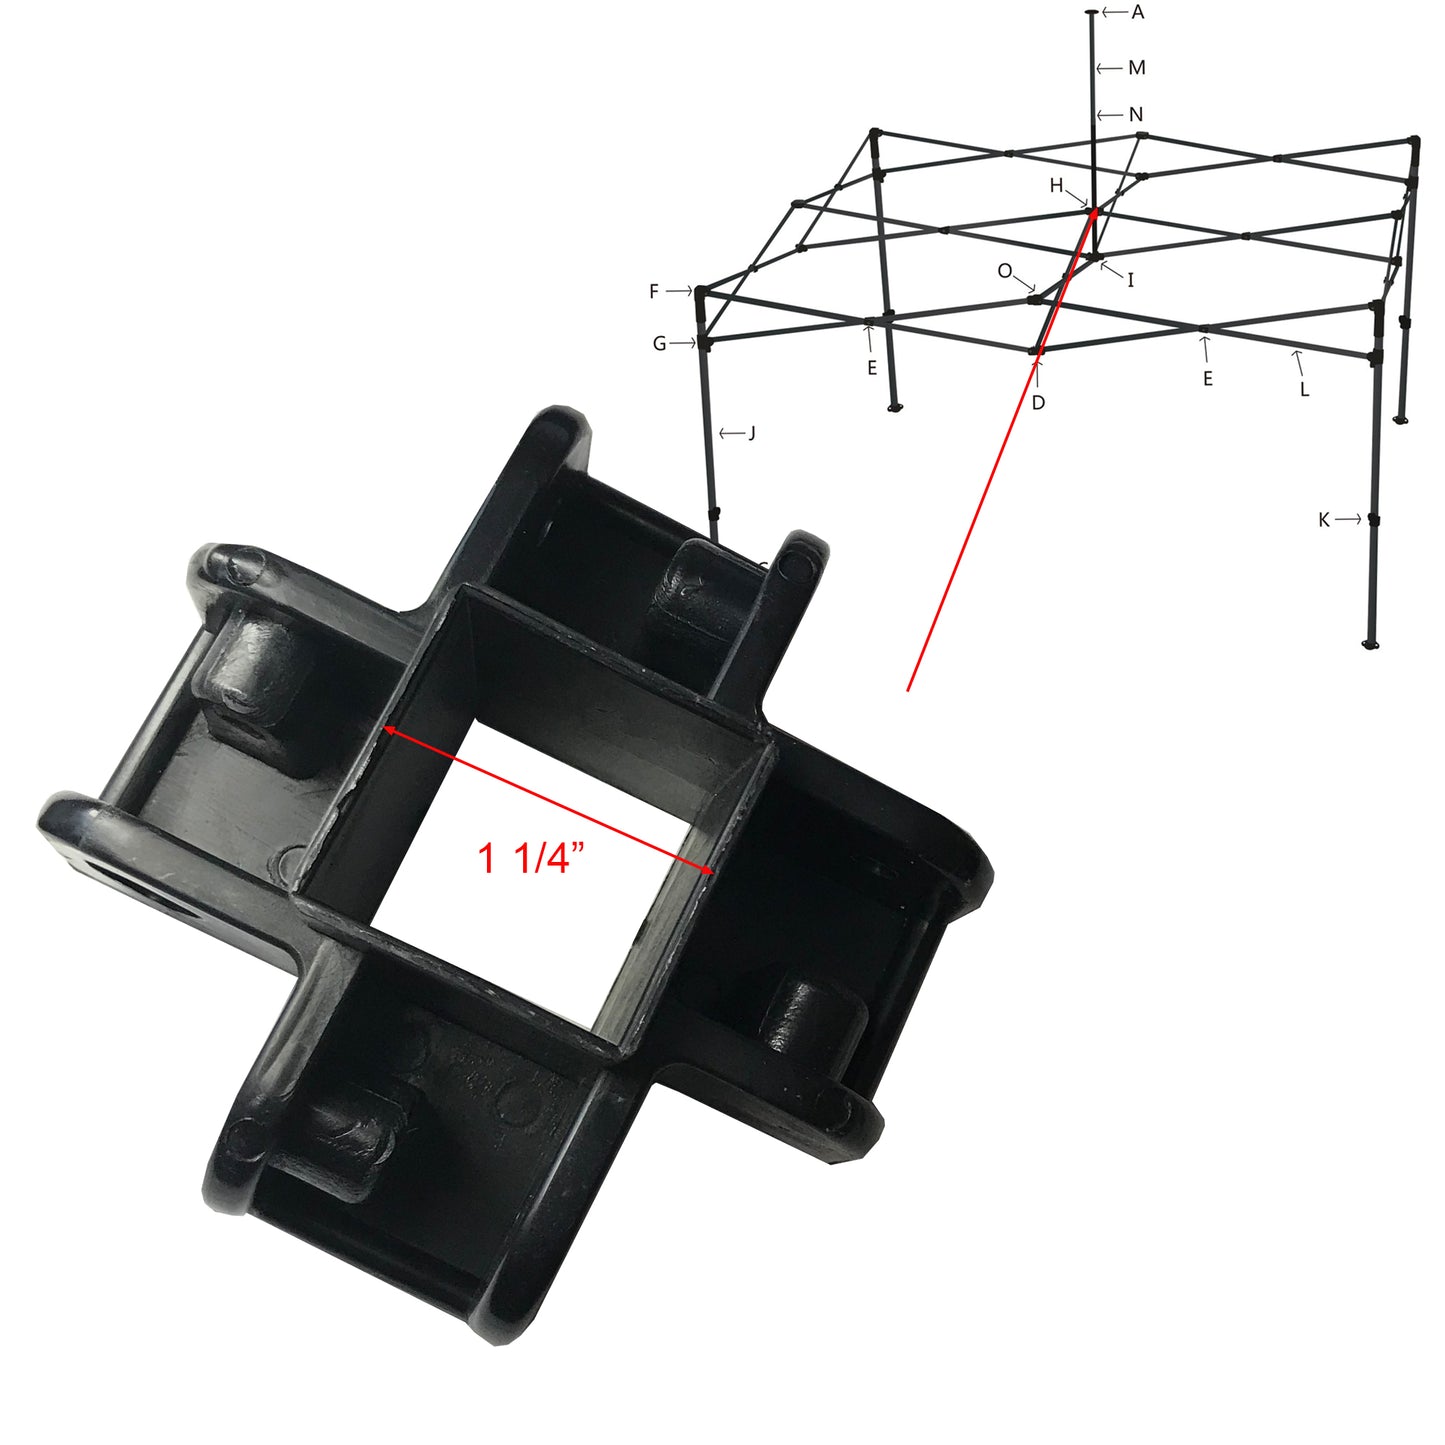 for ABCCANOPY S1 Commercial Deluxe, S2 Premium 10x10, 10x15, 10x20 ABC Canopy Upper Bracket (4-Way Connector) Replacement Parts (Part H)